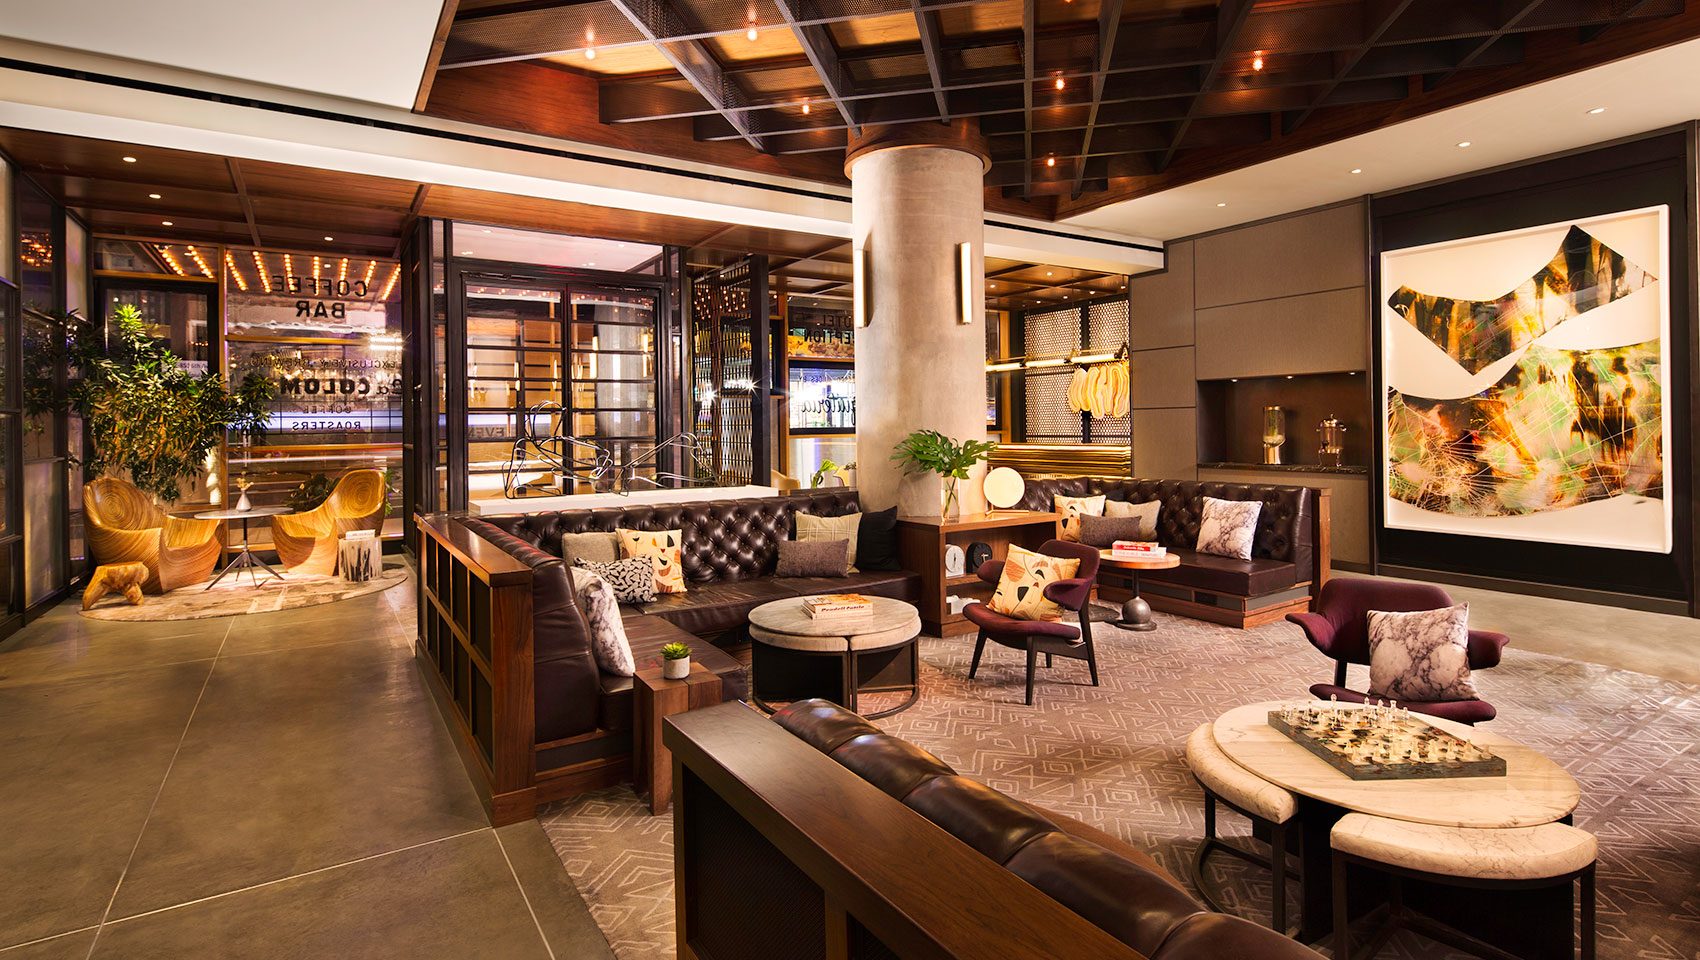 Kimpton Hotel Eventi lobby seating with leather seating, coffee tables, and large hanging art pieces